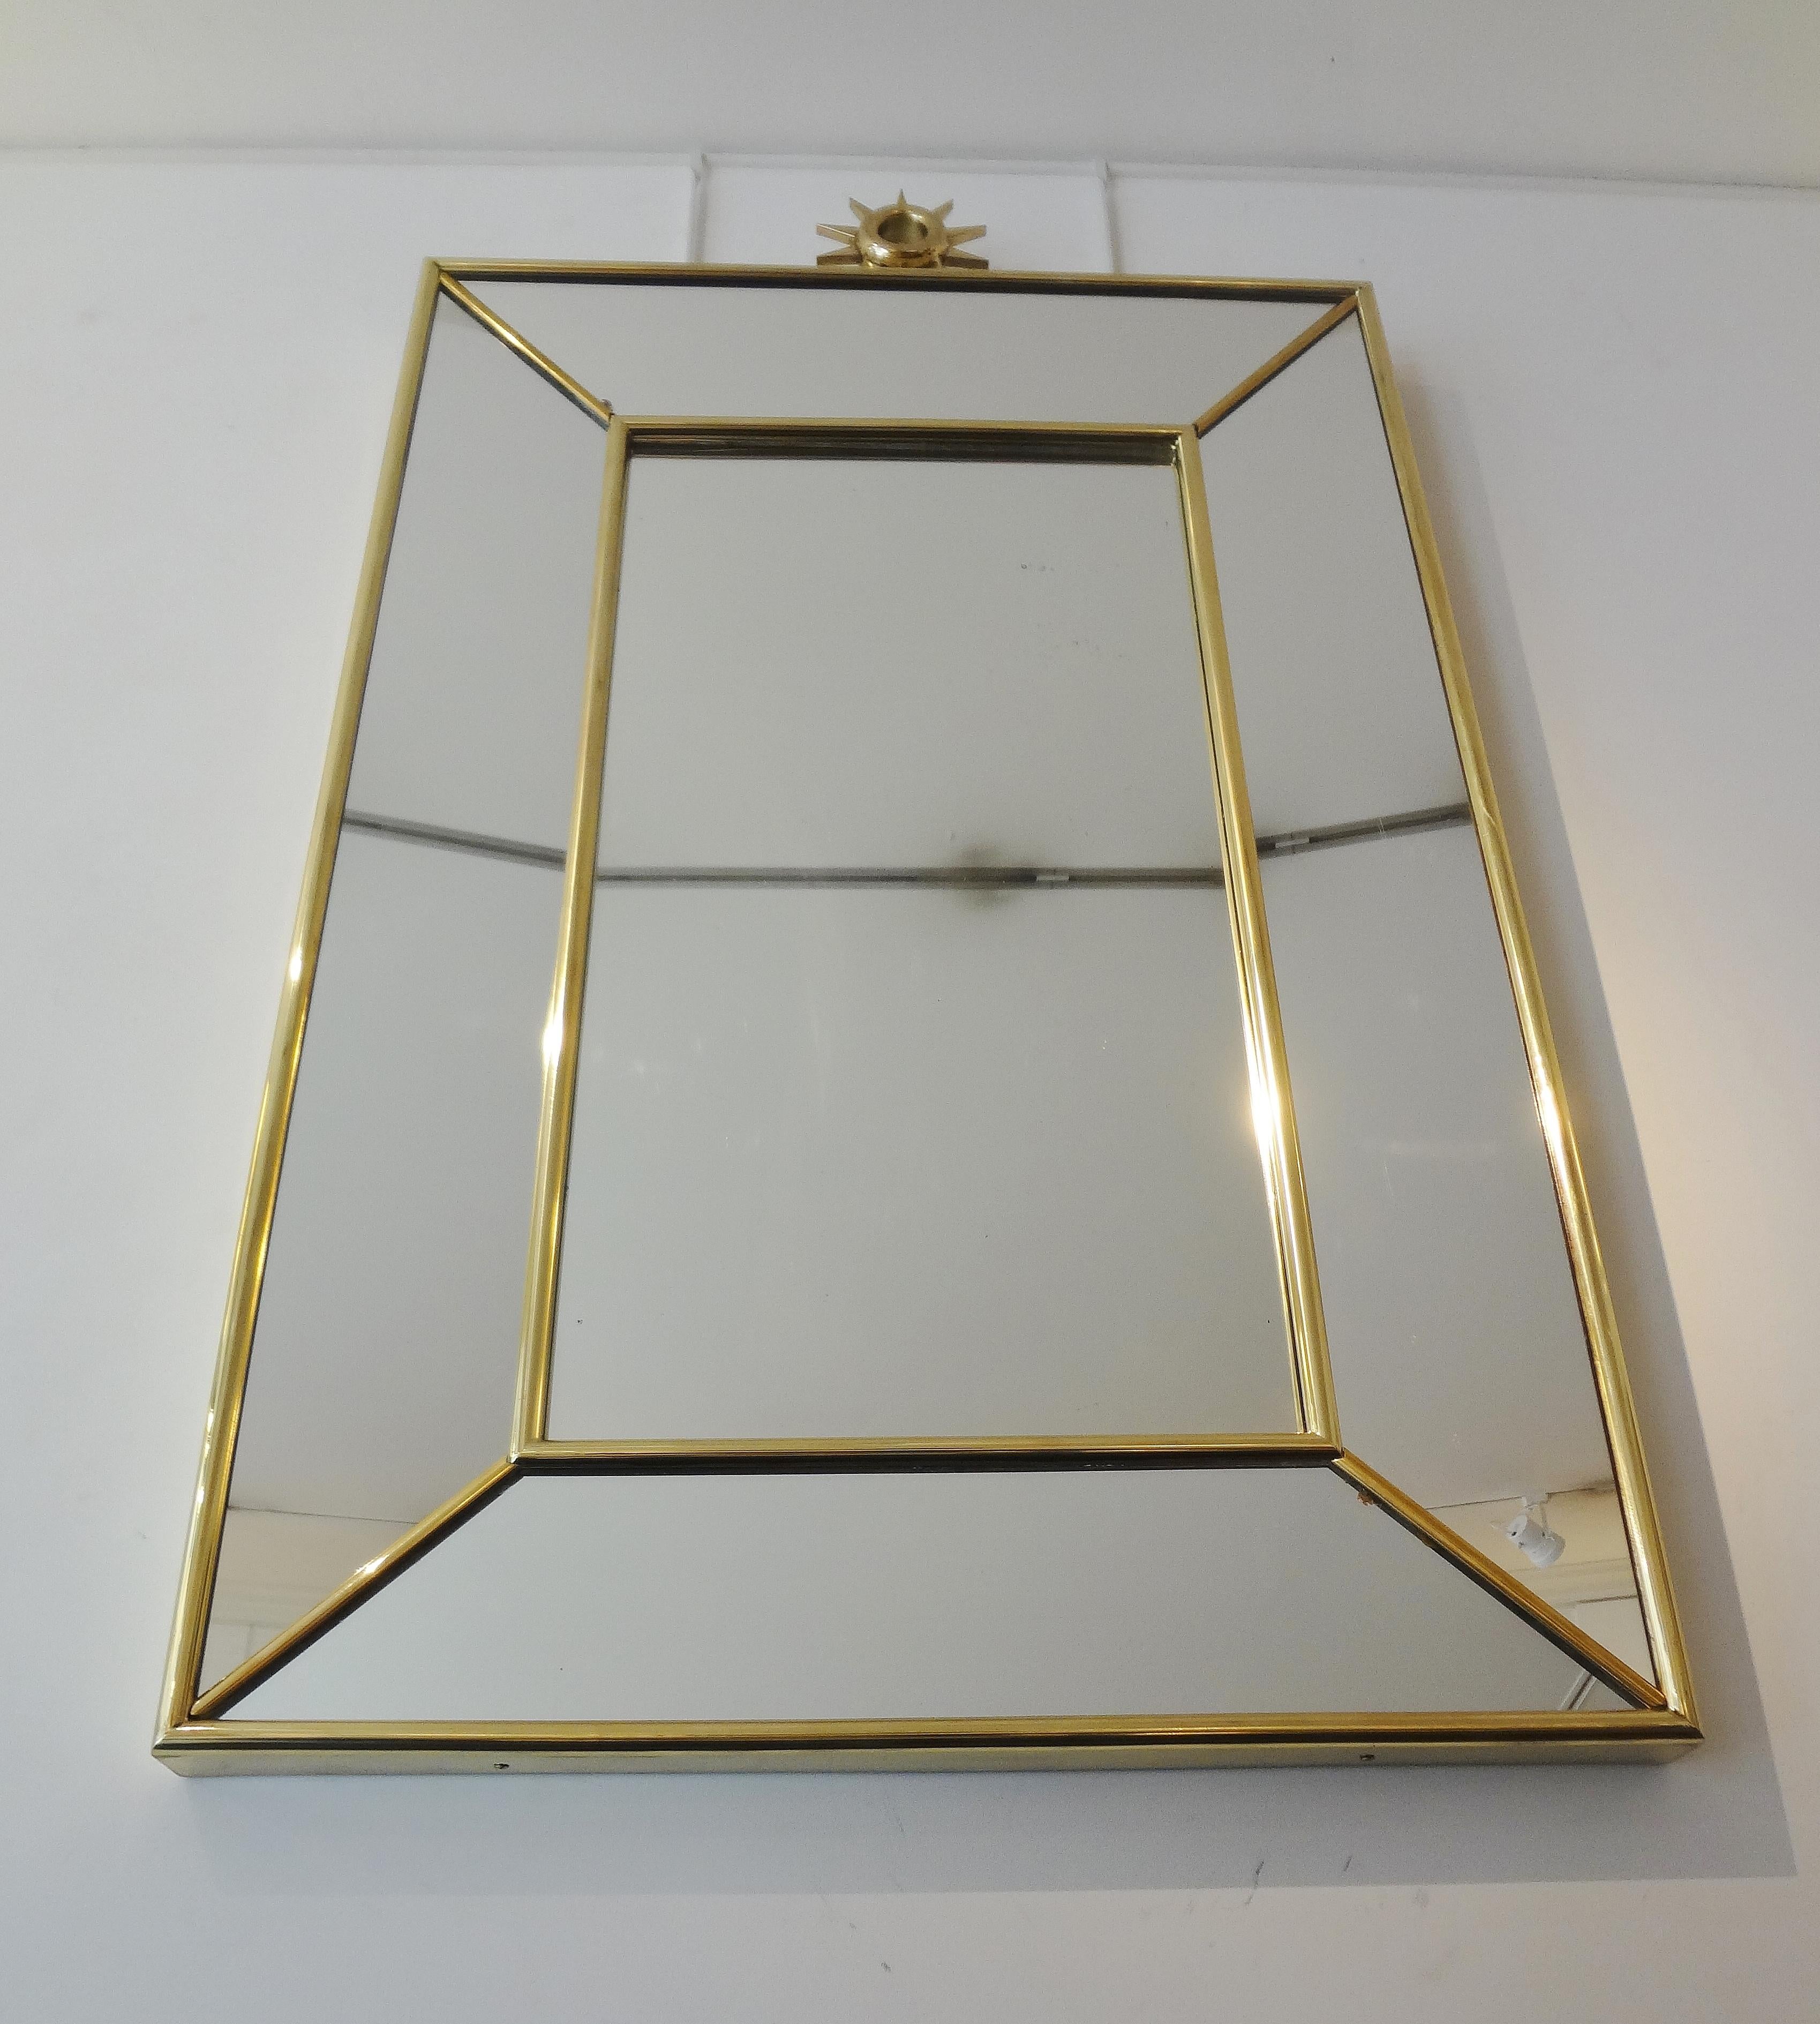 Italie, 1980.
Rare pair of large gilt brass rectangular mirrors
With elegant double frame and a star upon.
Central mirror piece h.80 x w.42 cm.
Major height 118 cm.